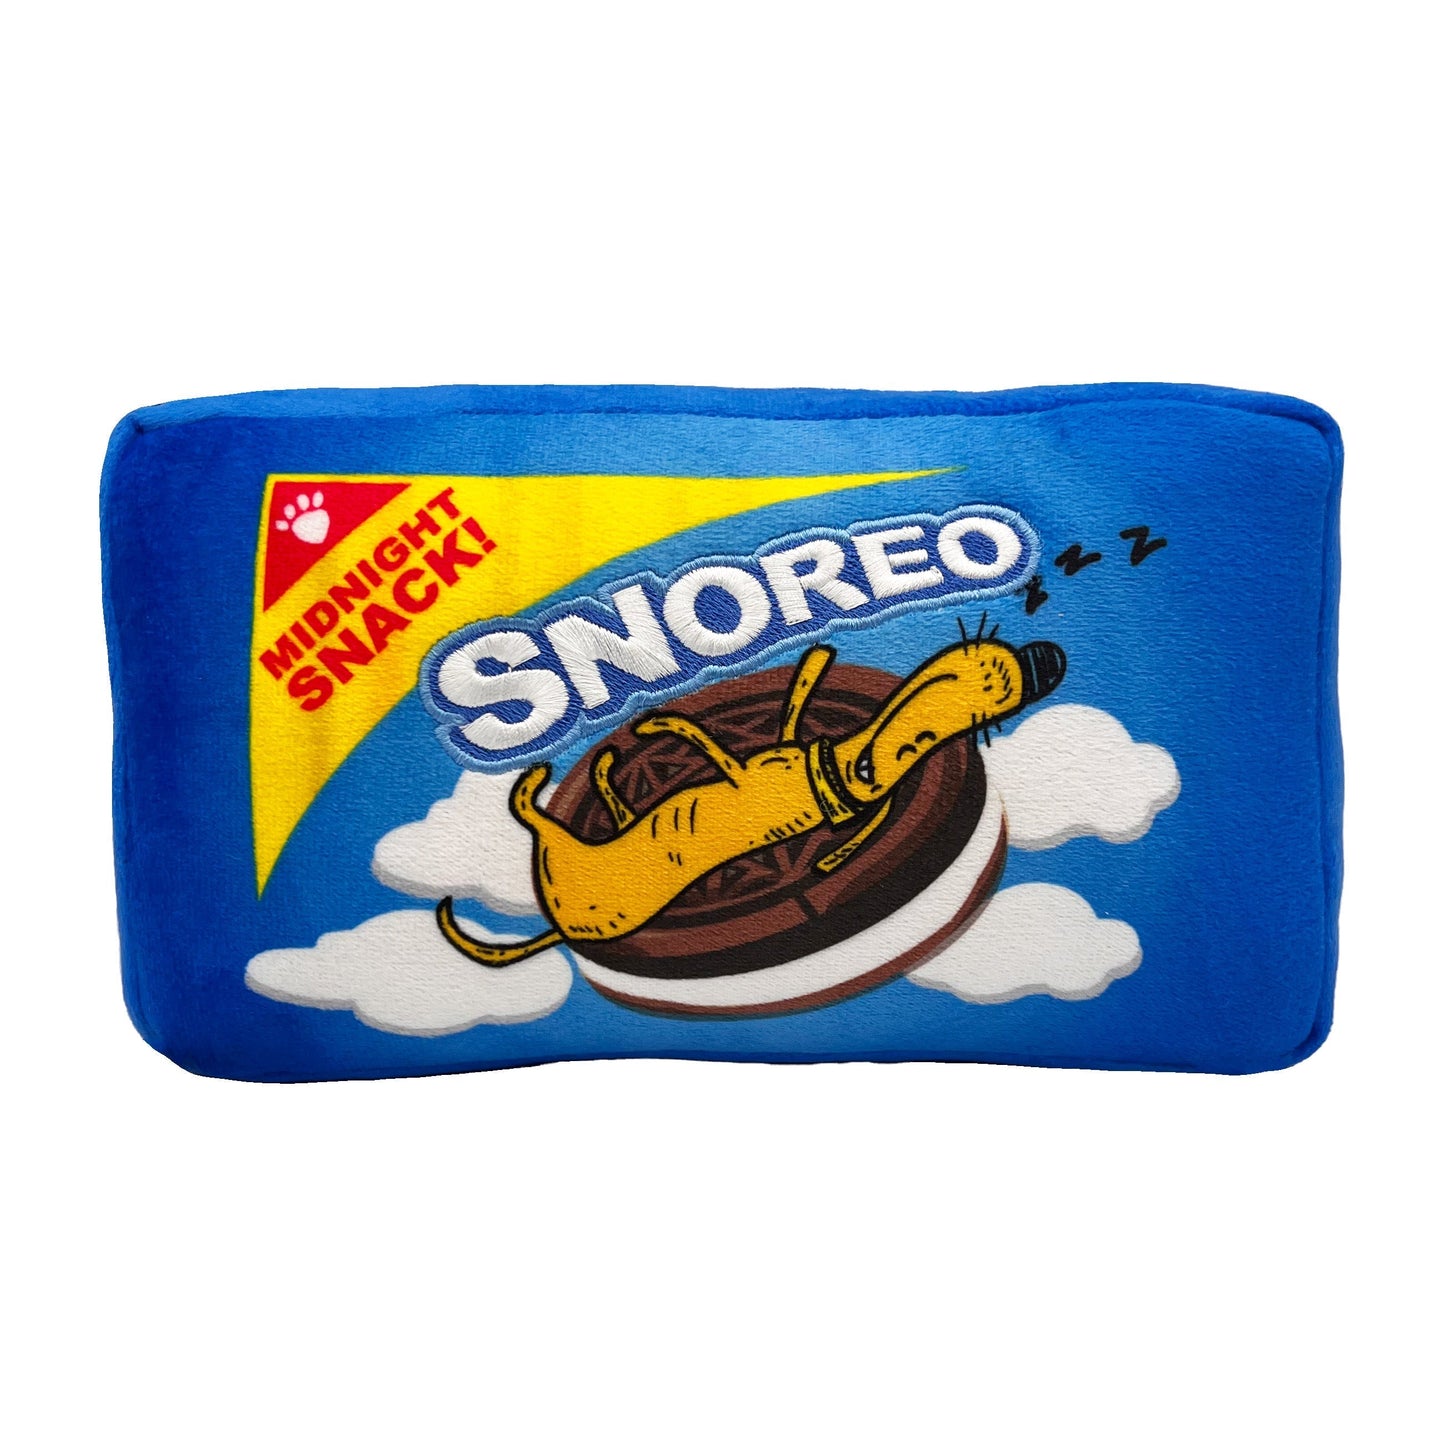 Snoreo Cookies Dog Toy